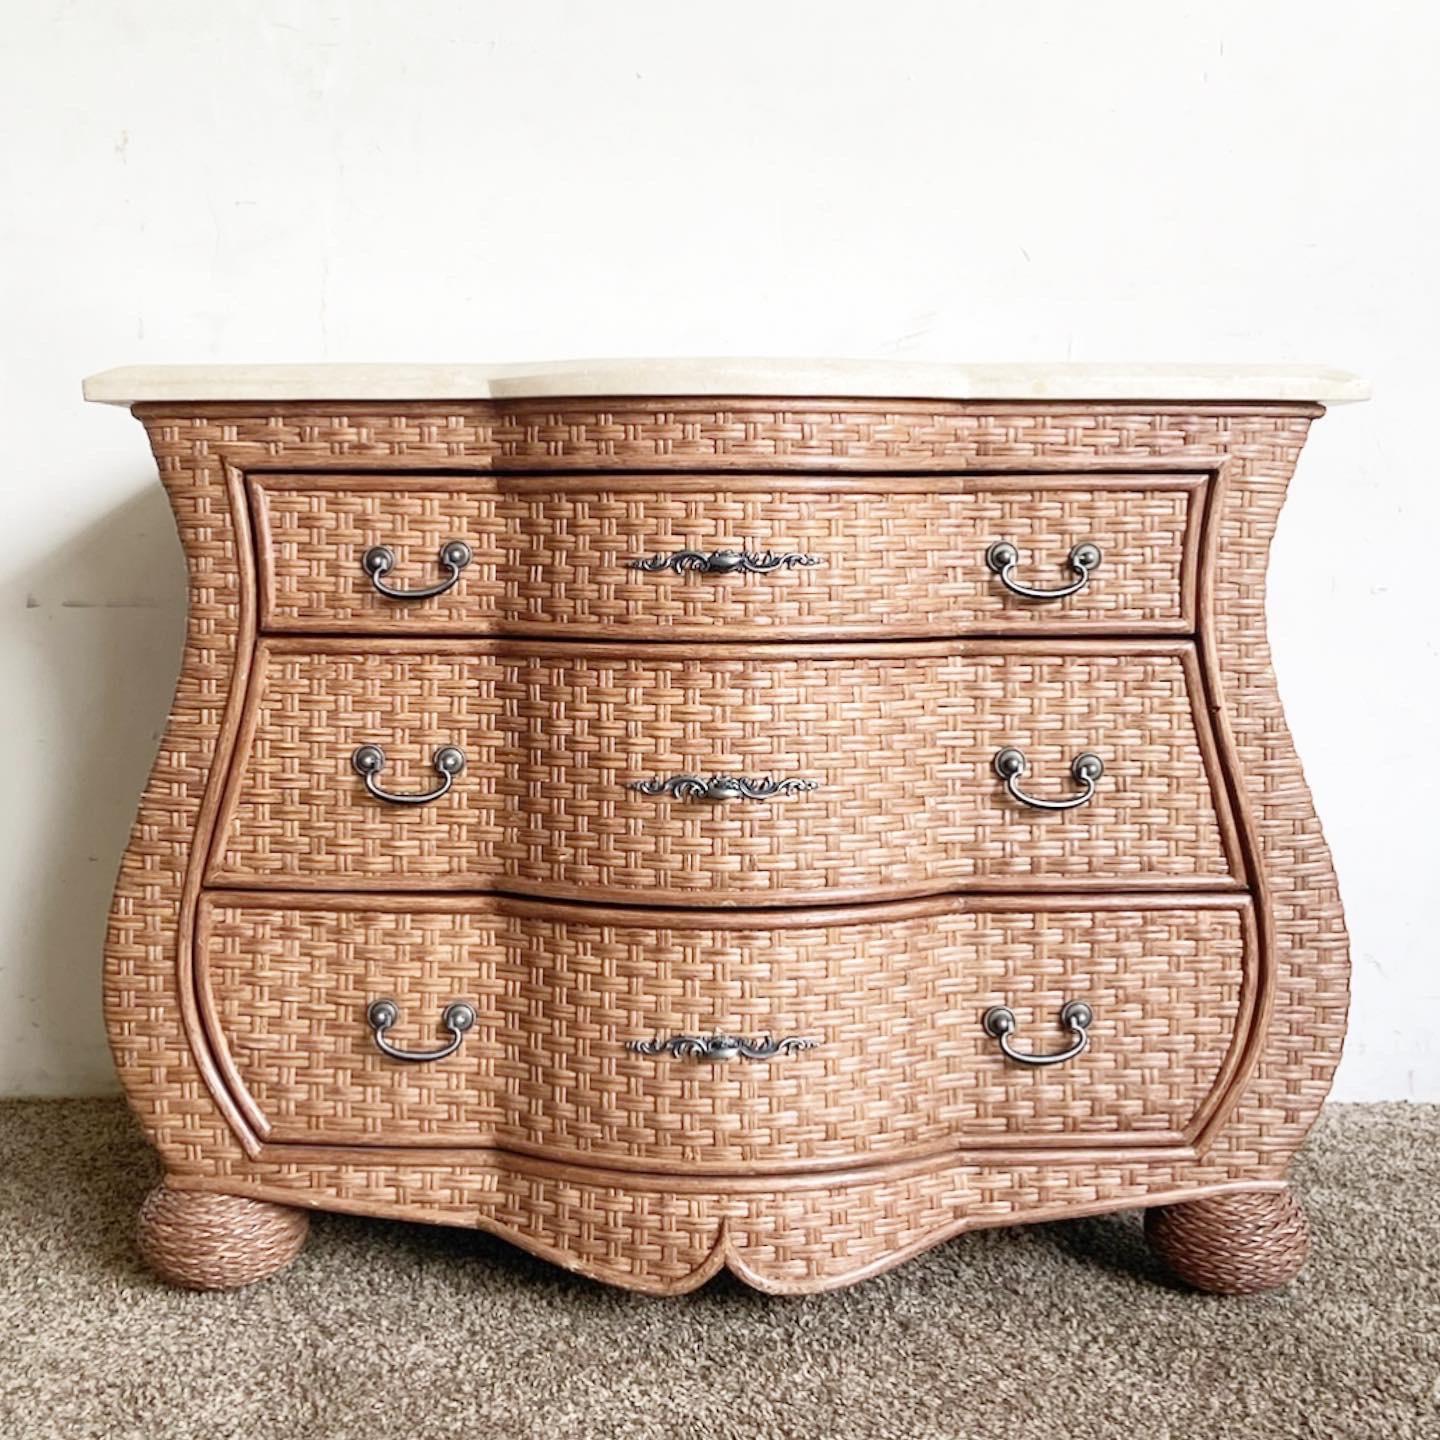 Our Boho Chic Wicker Tessellated Stone Top Chest of Drawers melds rustic charm with modern elegance. This handcrafted piece with ample storage space is a blend of functionality and style.

Handcrafted, brown wicker construction.
Unique tessellated